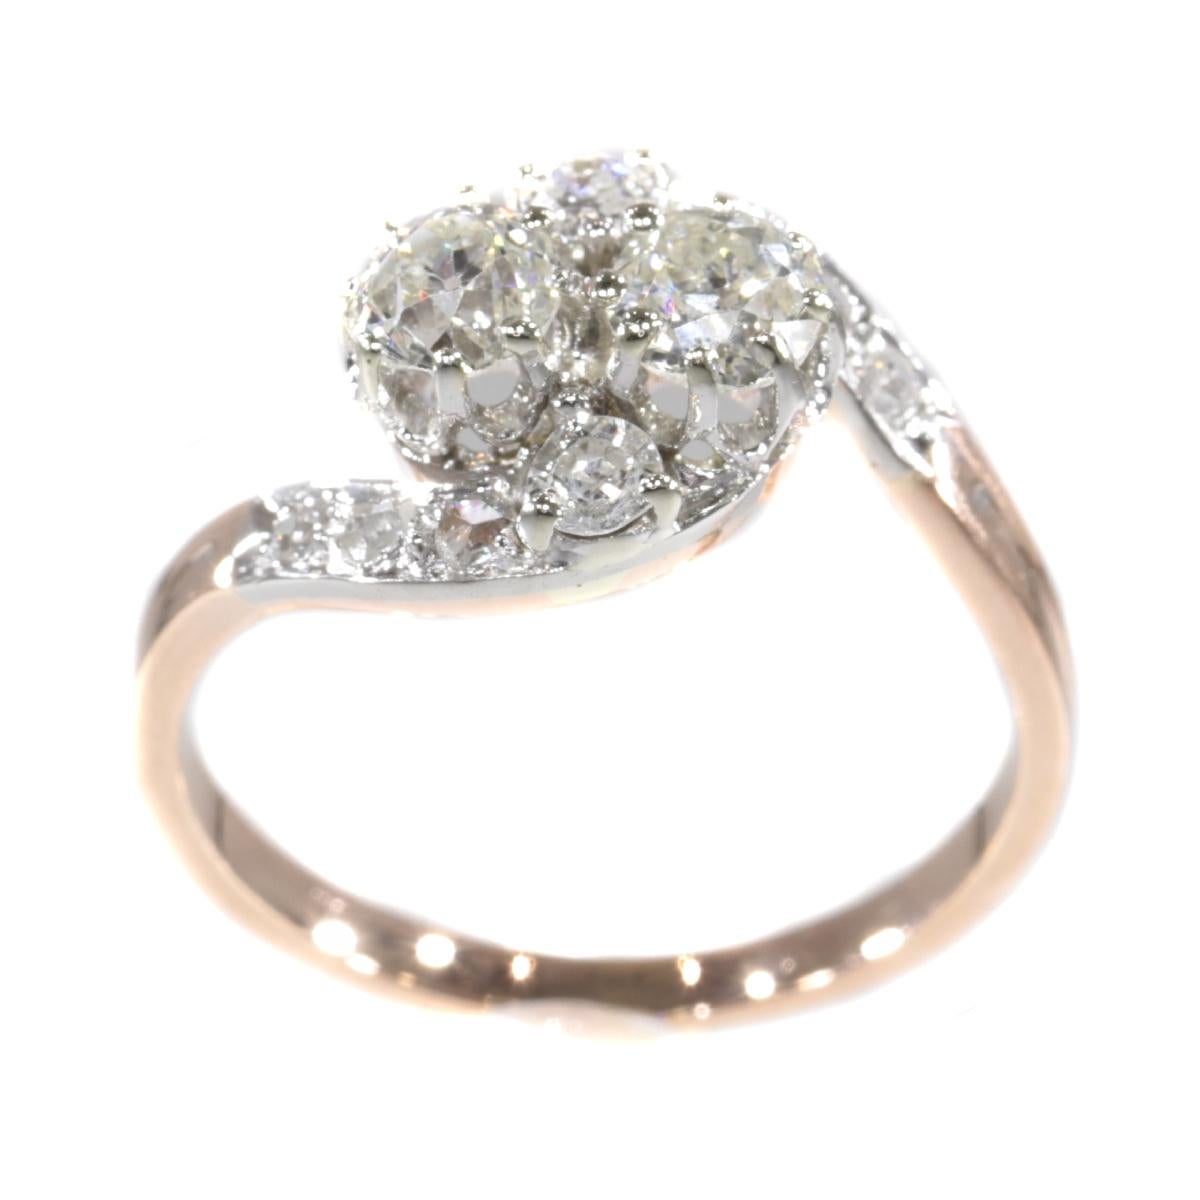 Belle Époque Belle Epoque Romantic Diamond Toi et Moi Engagement Ring, French for You and Me For Sale